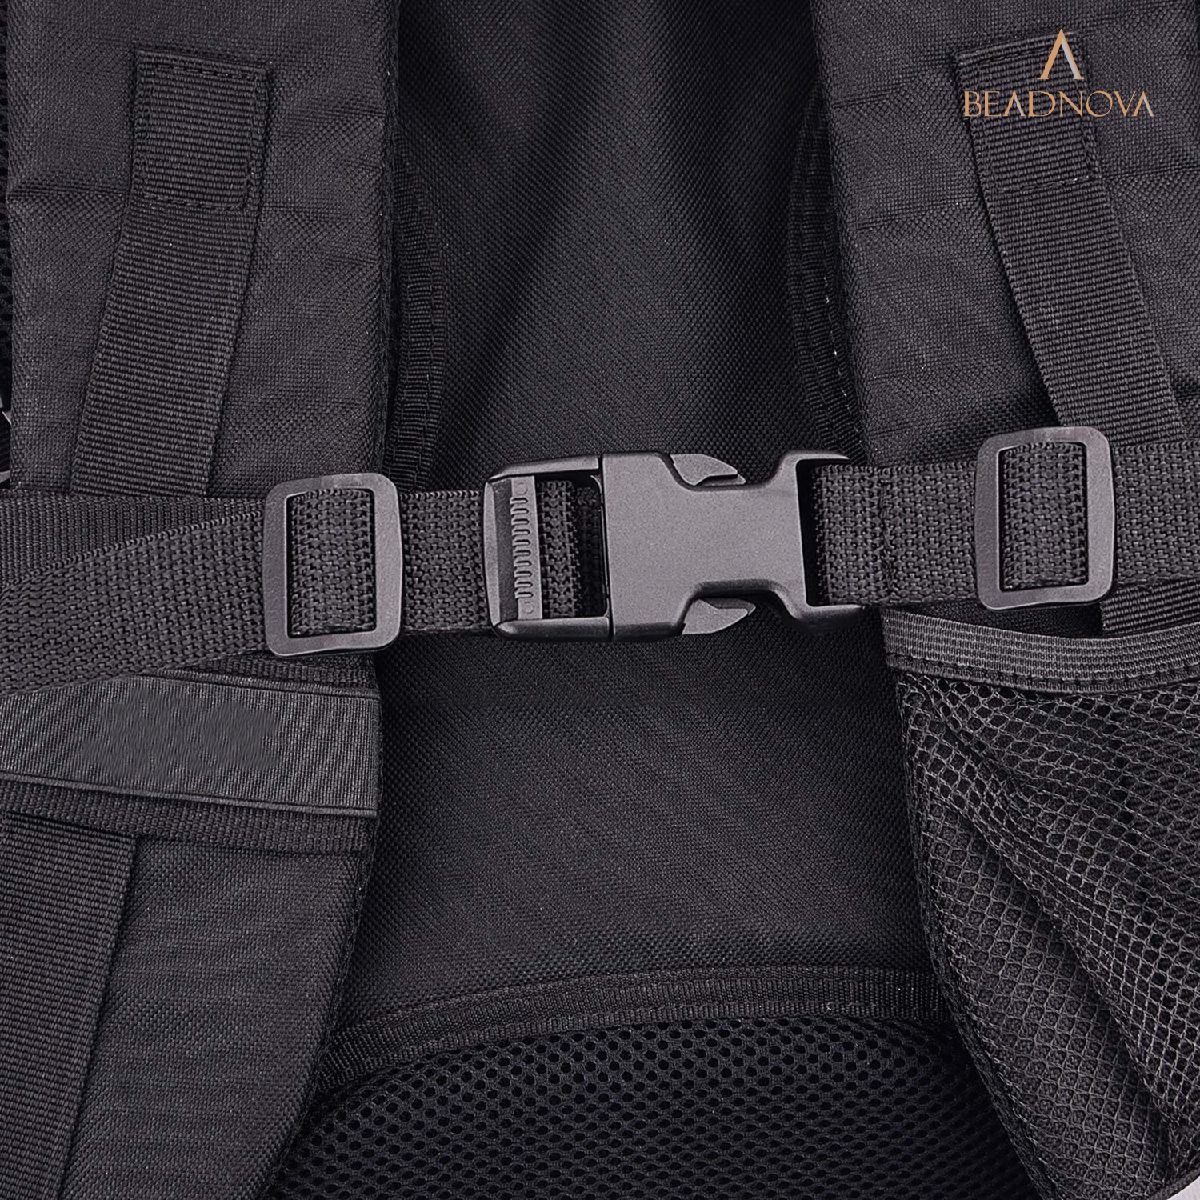 1.25,1.5,2Inch Adjustable Buckles for Backpack Straps Webbing 1 DYZD Multi-Size 4 PCS Plastic Side Release Buckles 0.8 1-1/2 inch, 4 PCS 